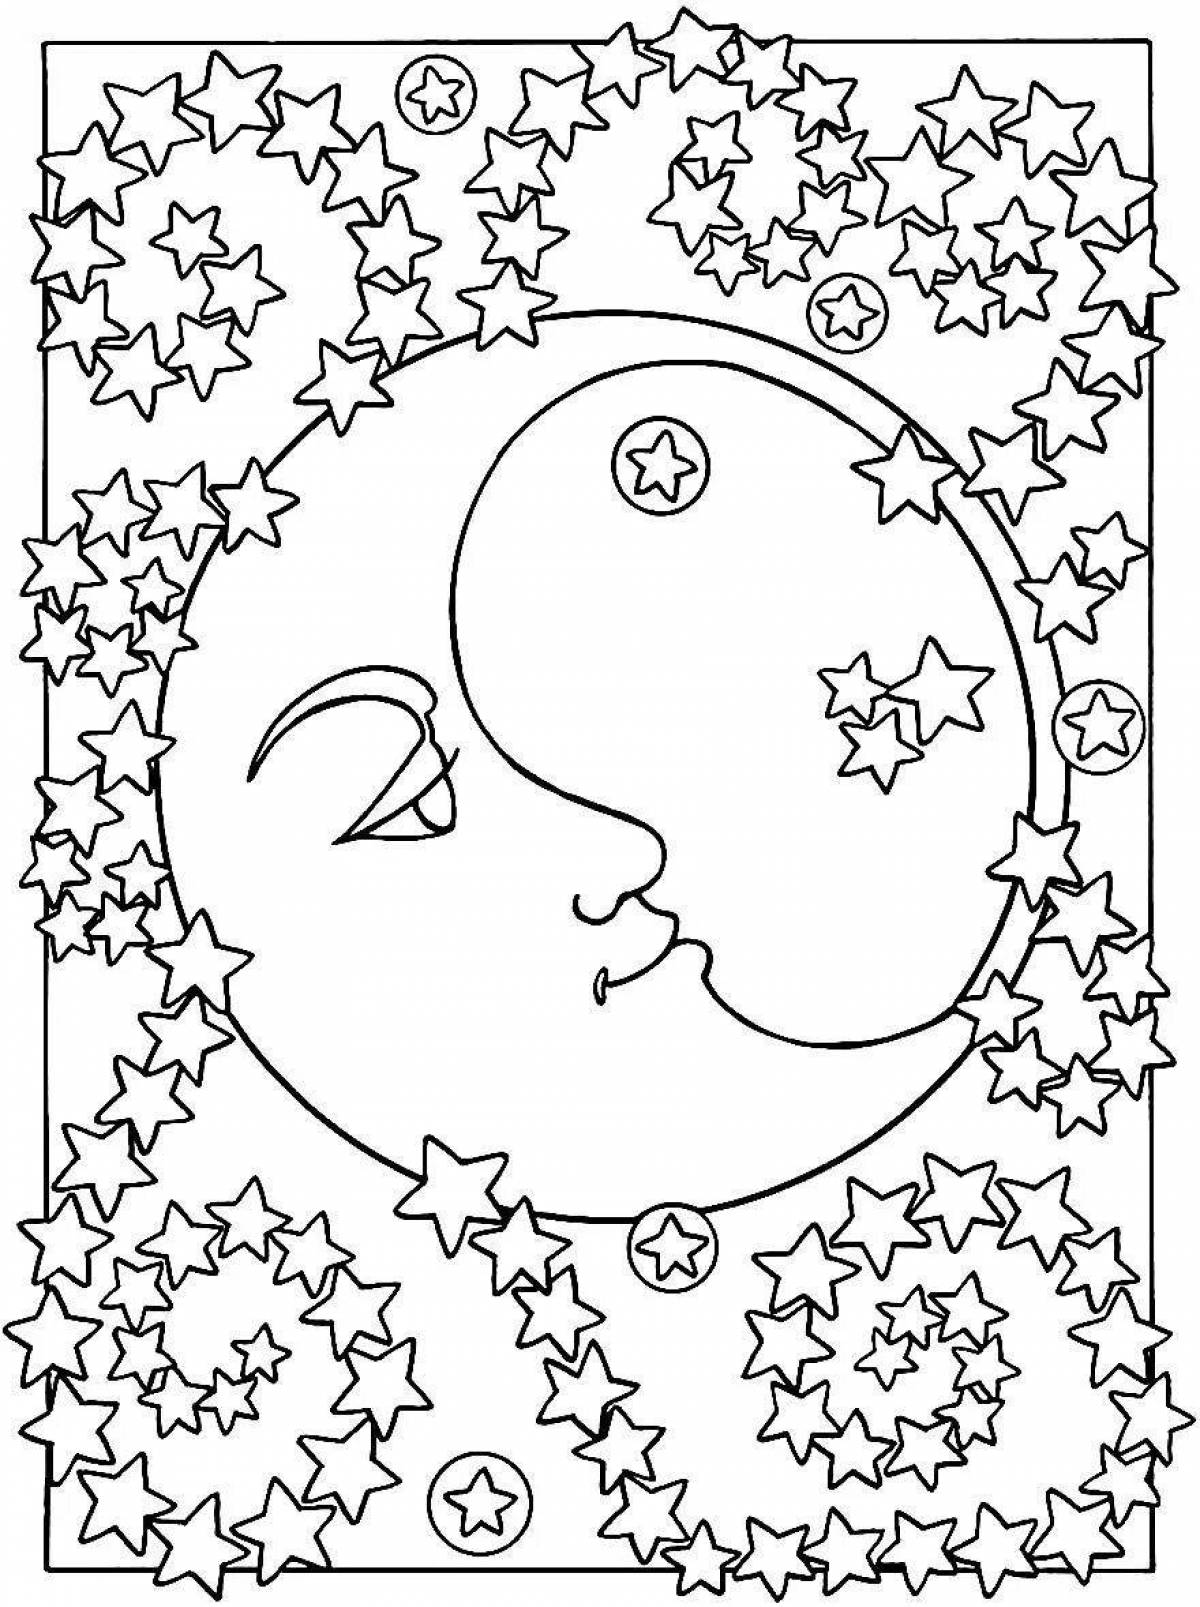 Fancy coloring moon and sun for kids